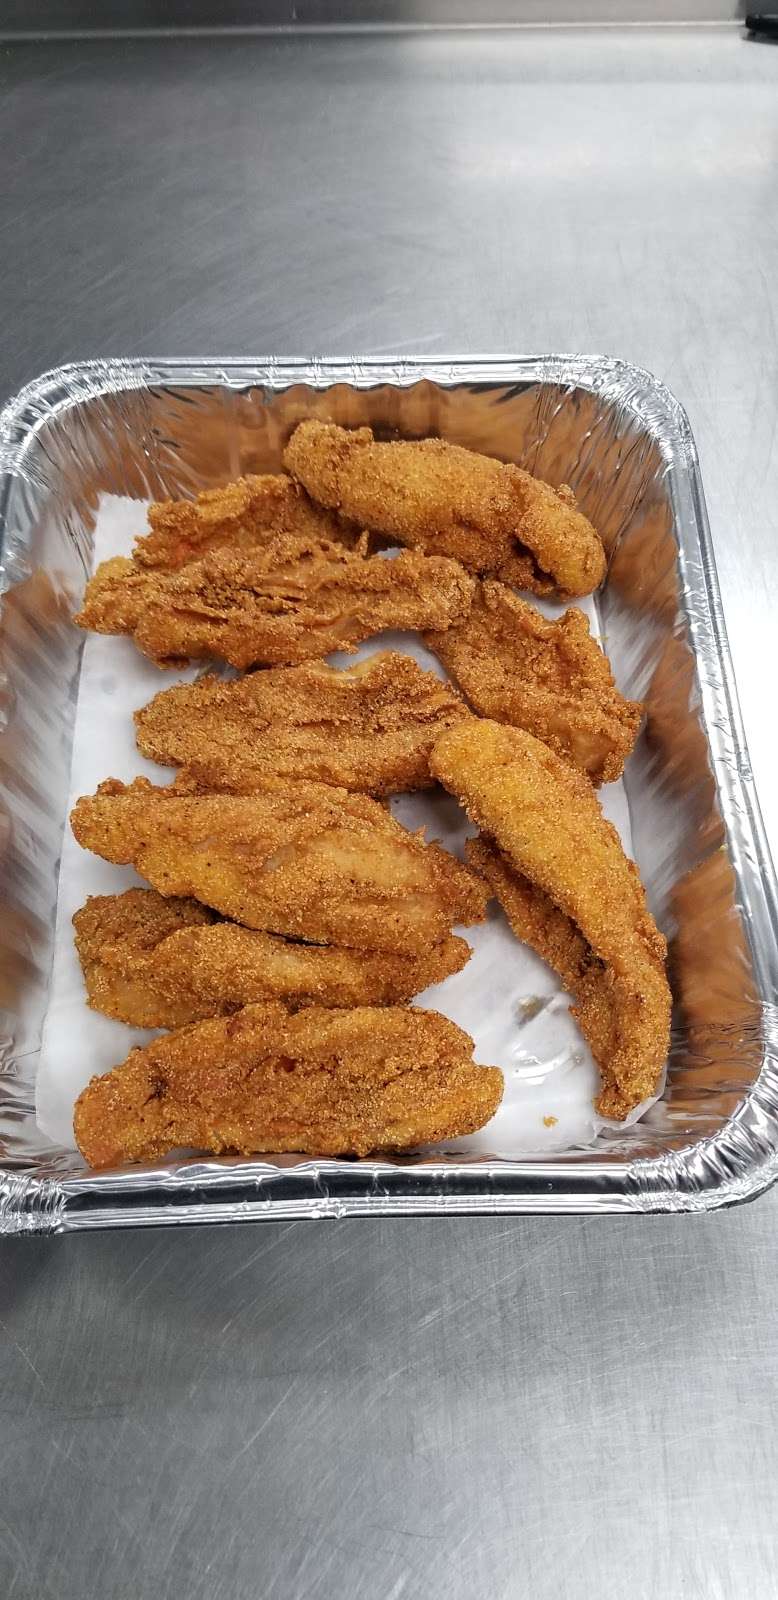 Thats Good Chicken | 2935 W 15th Ave, Gary, IN 46404 | Phone: (219) 702-4555